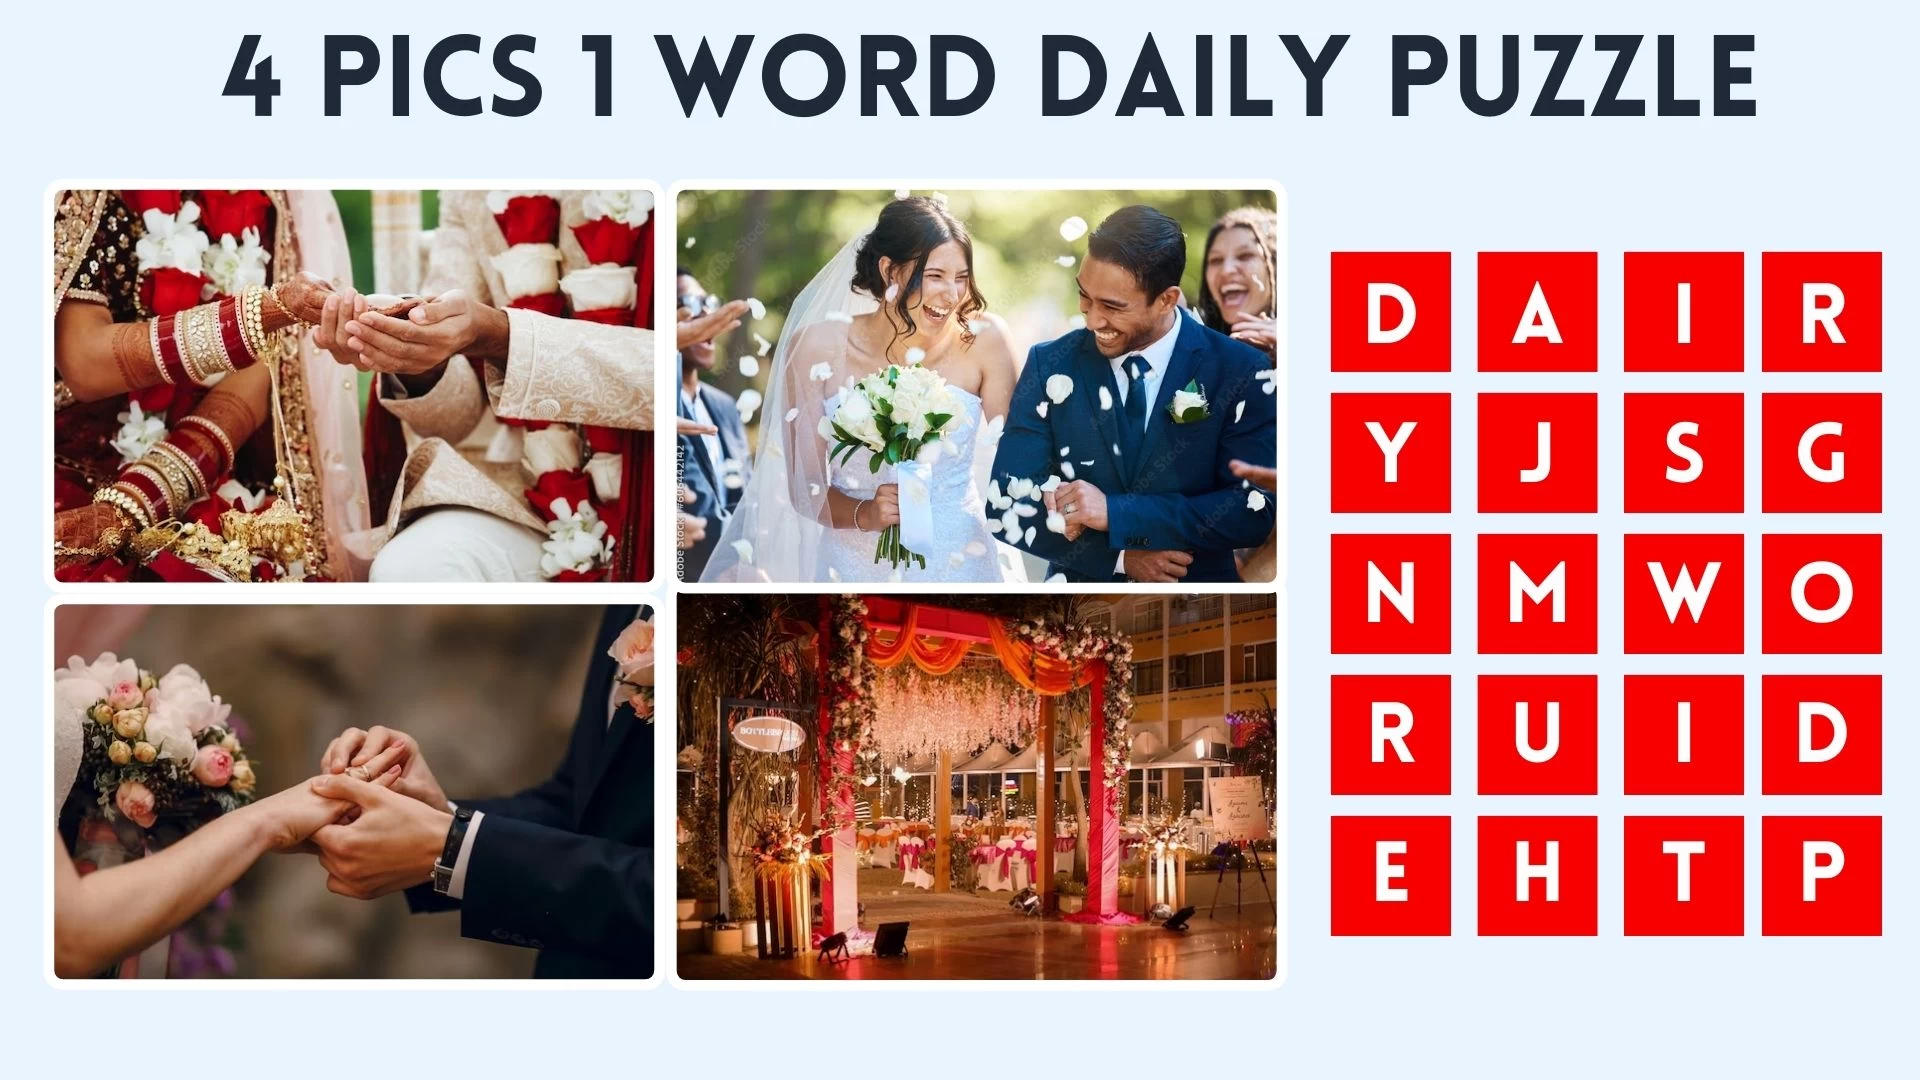 4 Pics 1 Word Daily Puzzle : Can You Find the Word in Just 5 Seconds?